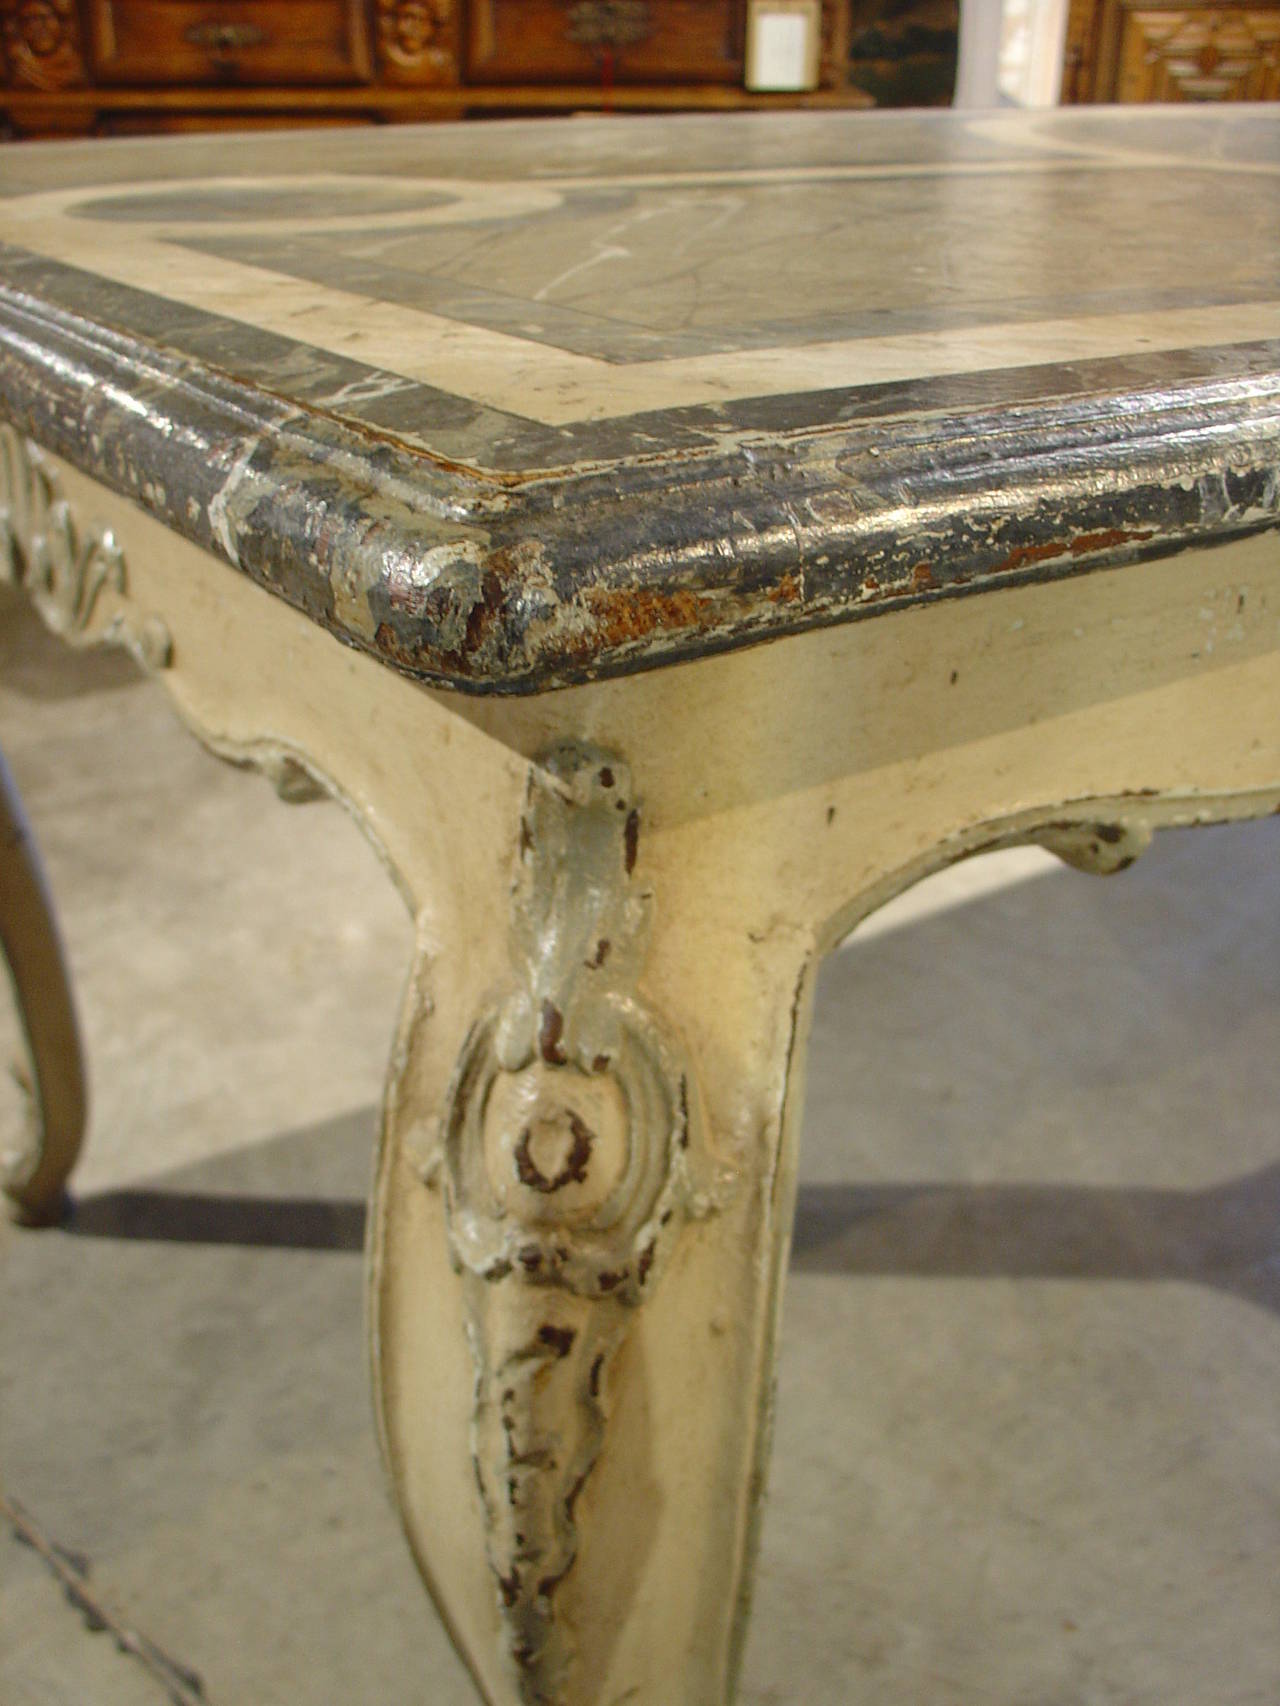 This antique, French painted rectangular dining table is in the Louis XV style and is reminiscent of Provence. It has a painted faux marble top in tones of pale green, medium green and dark green with beige veining running throughout. The design on